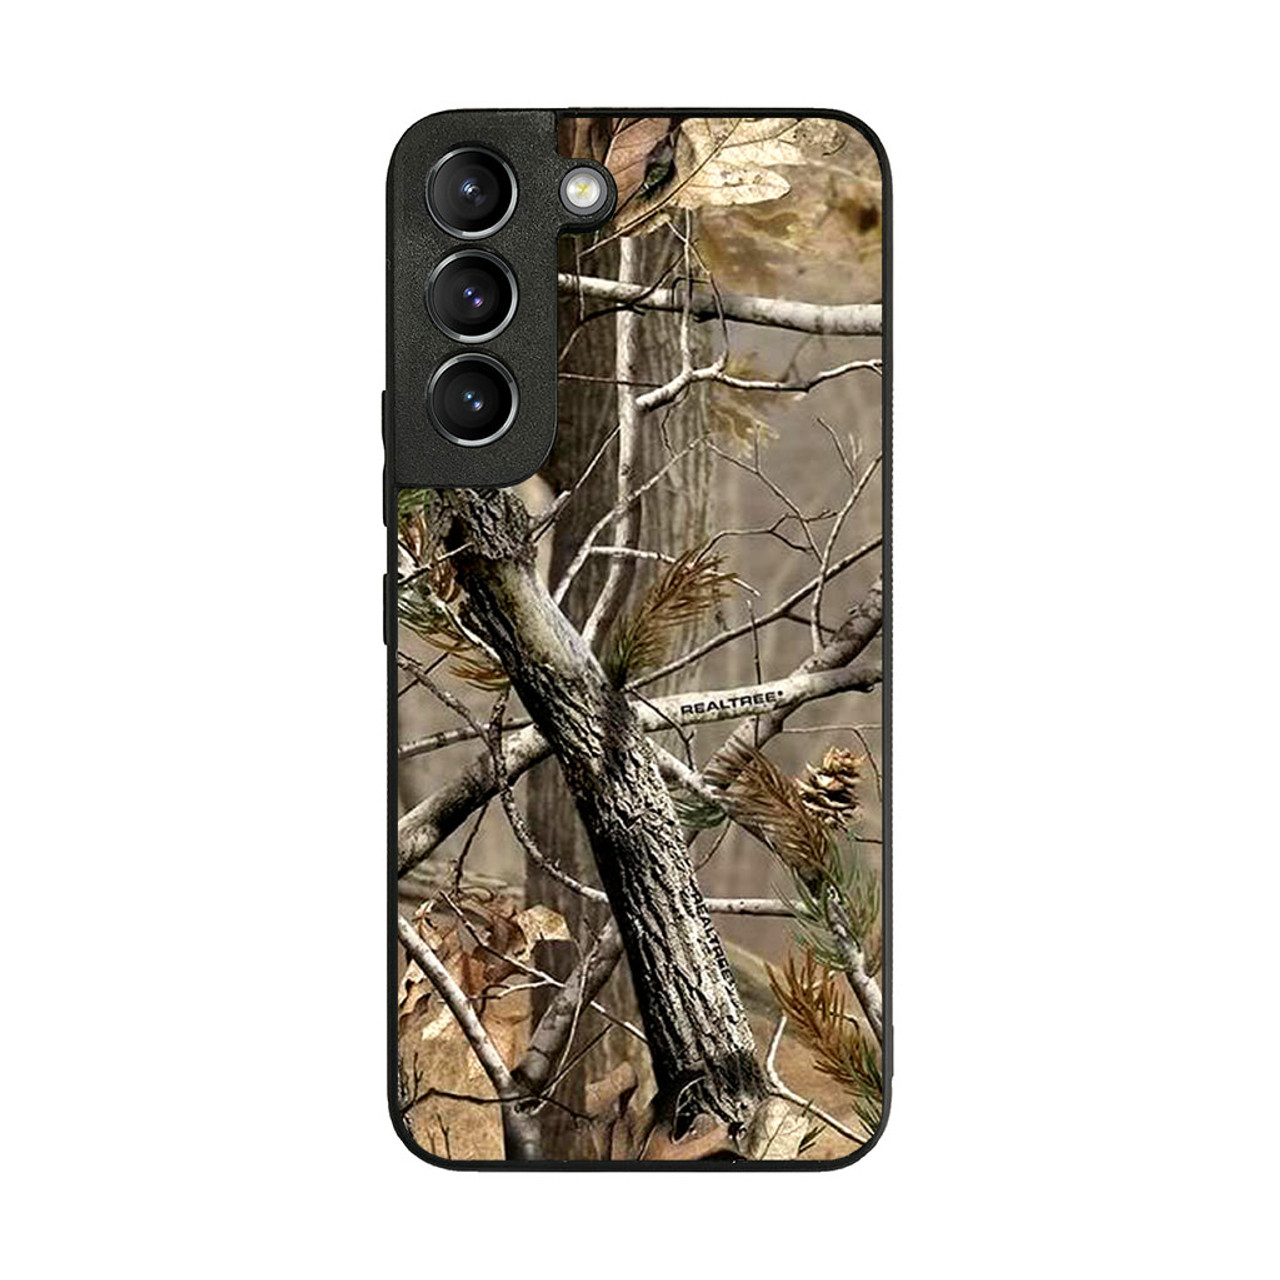 Dijk Likeur Drink water Camoflage Camo Real Tree Samsung Galaxy S22 Case - CASESHUNTER